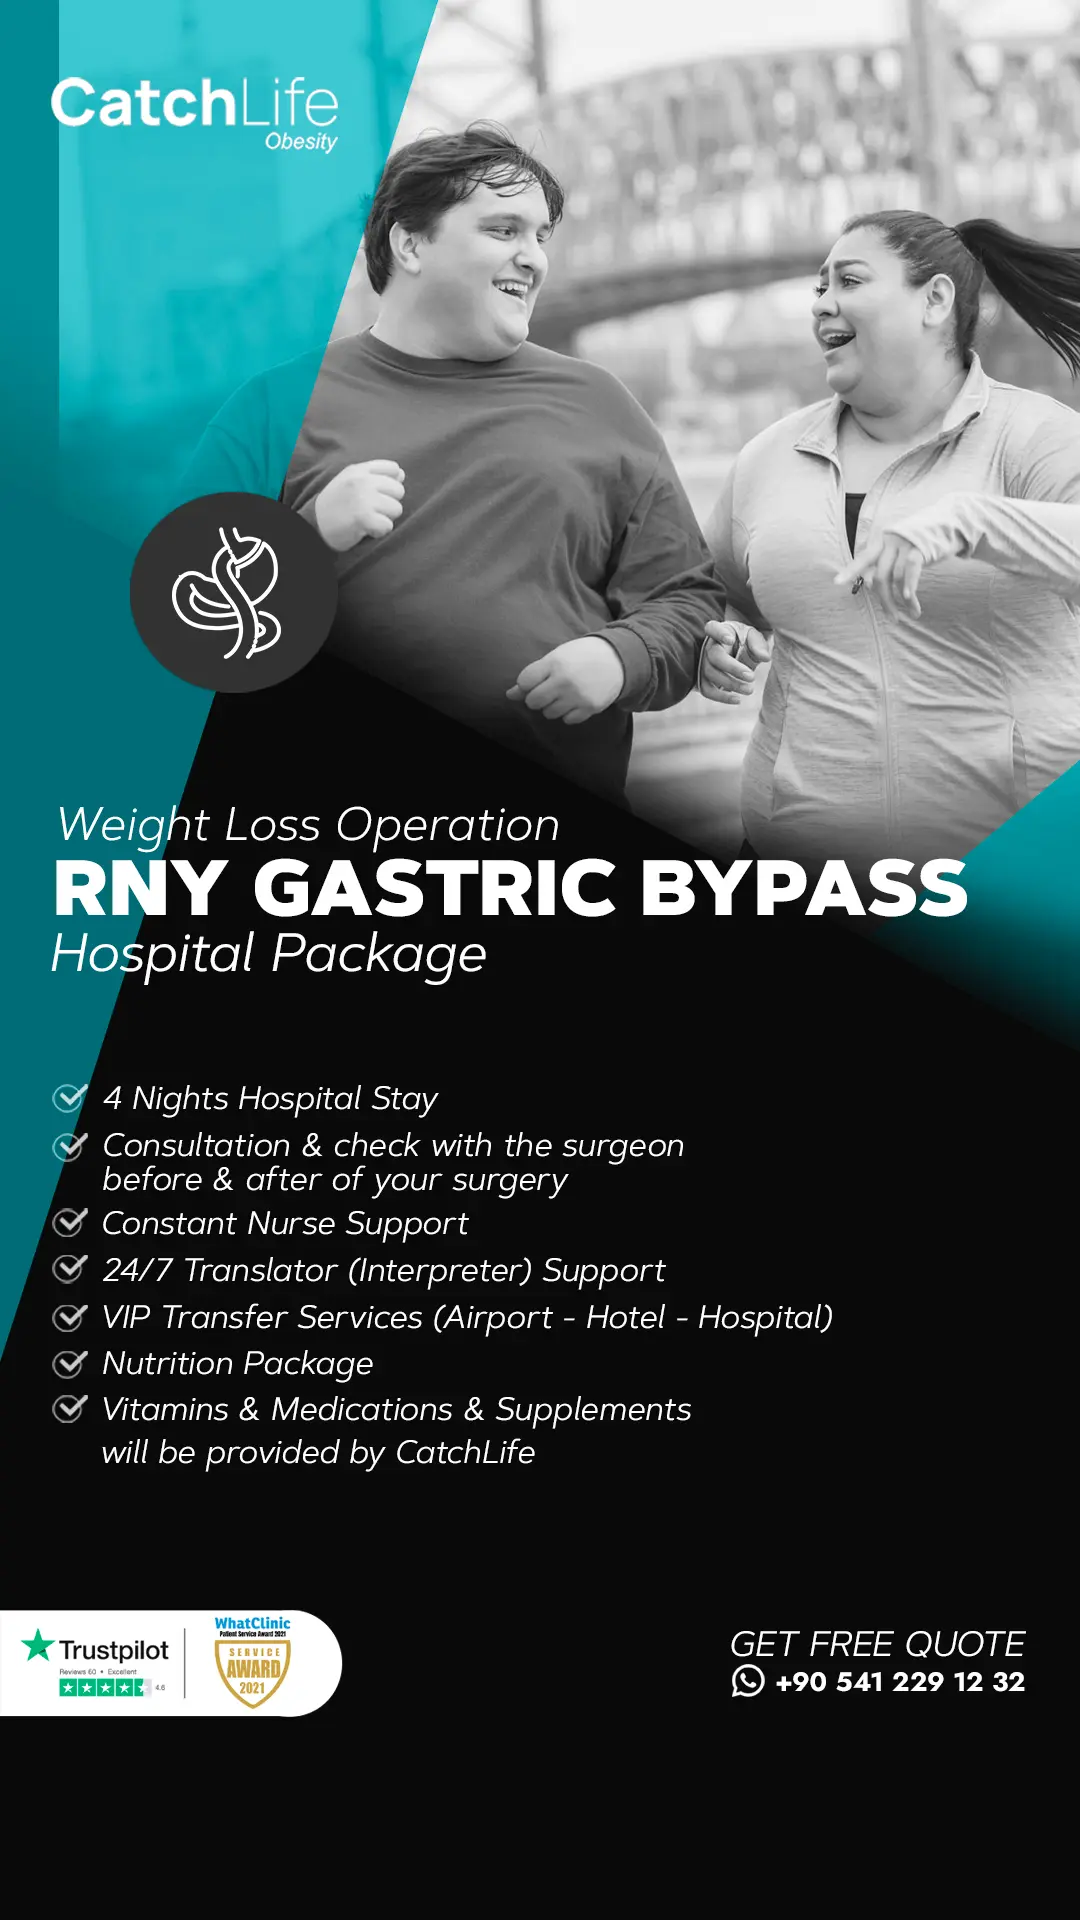 gastric-bypass-hospital-package-turkey-img